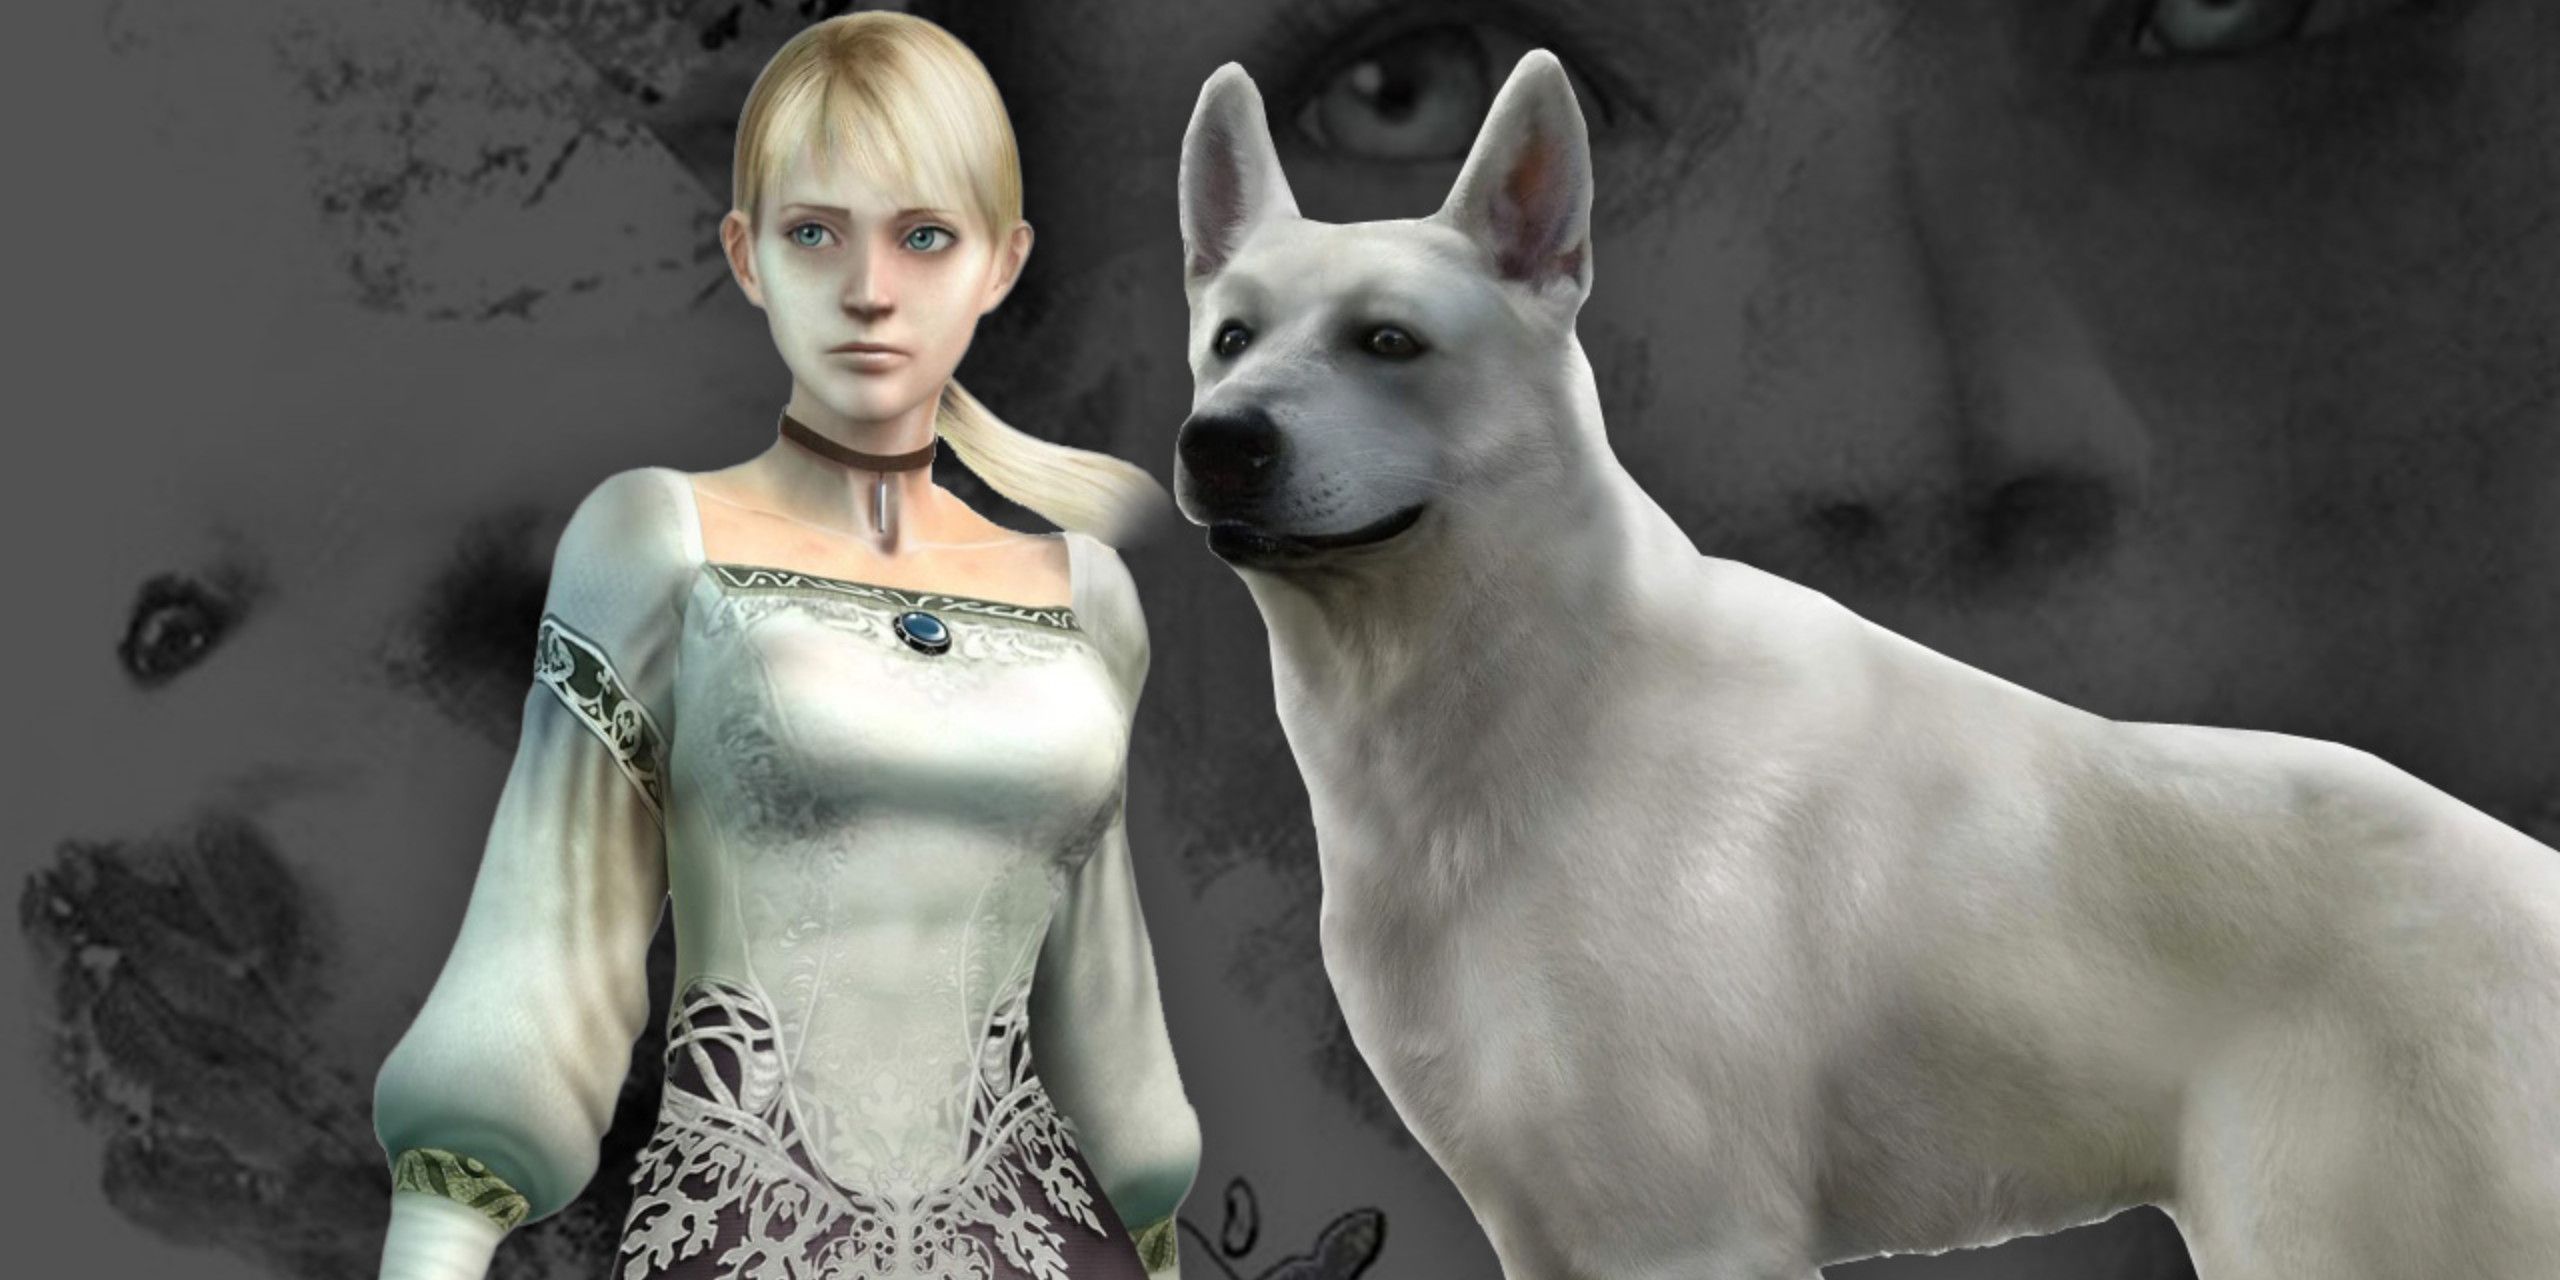 Fiona and Hewie from the horror survivor game Haunting Ground